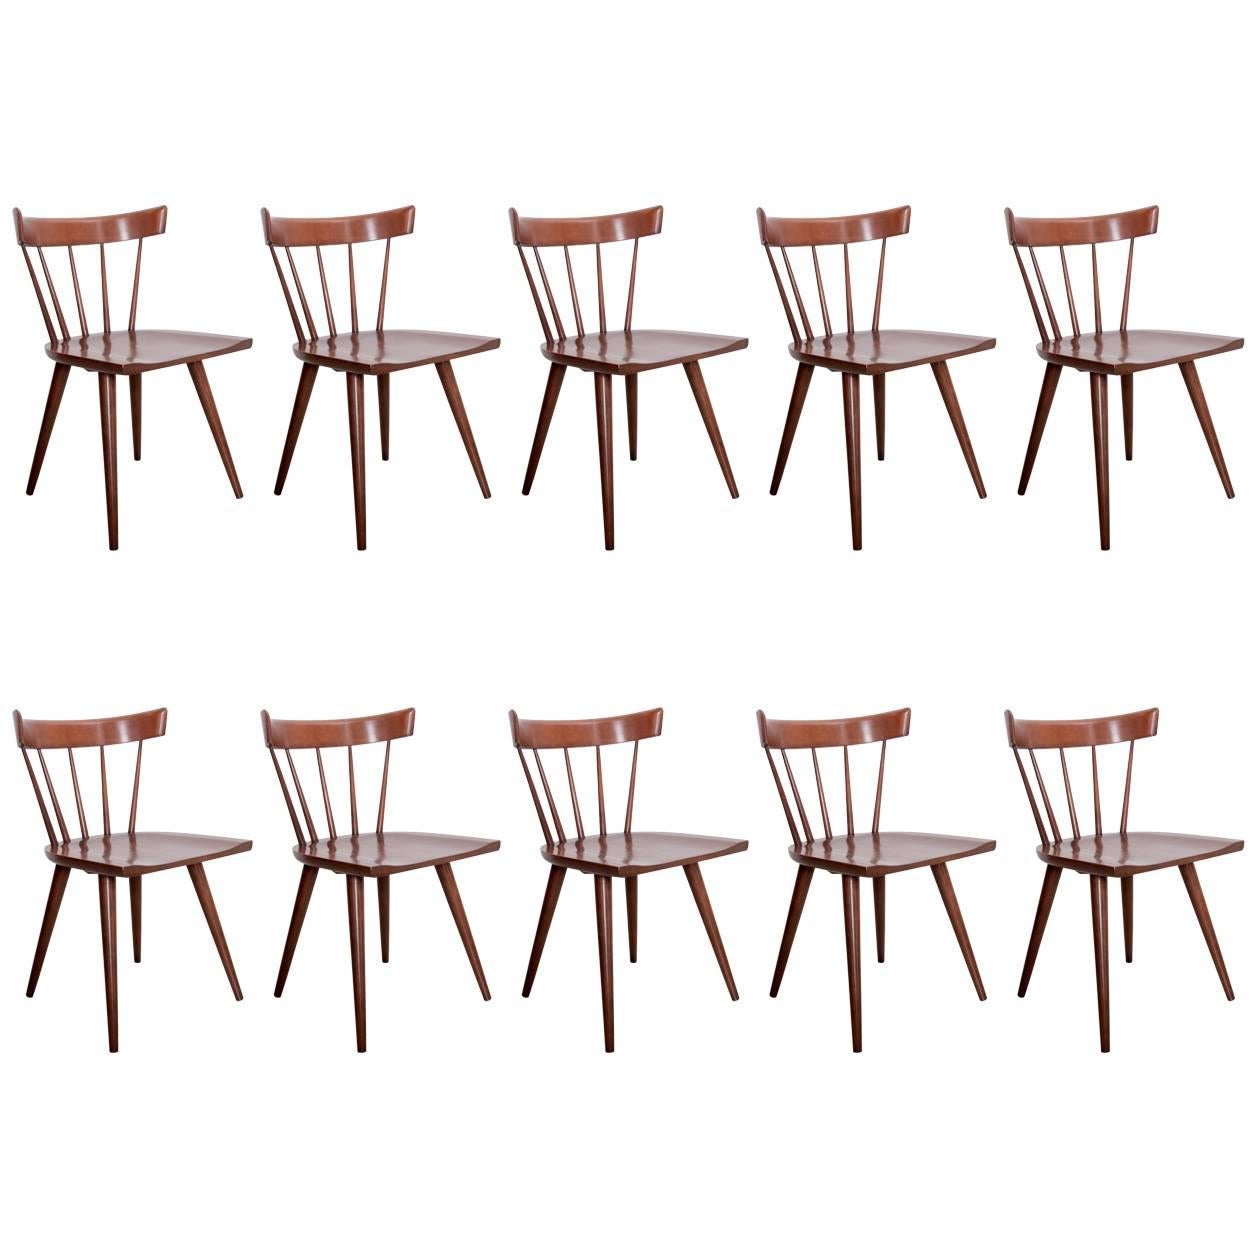 Set of Ten Dark Paul McCobb Spindle Back Chairs for Winchendon, USA, 1950s